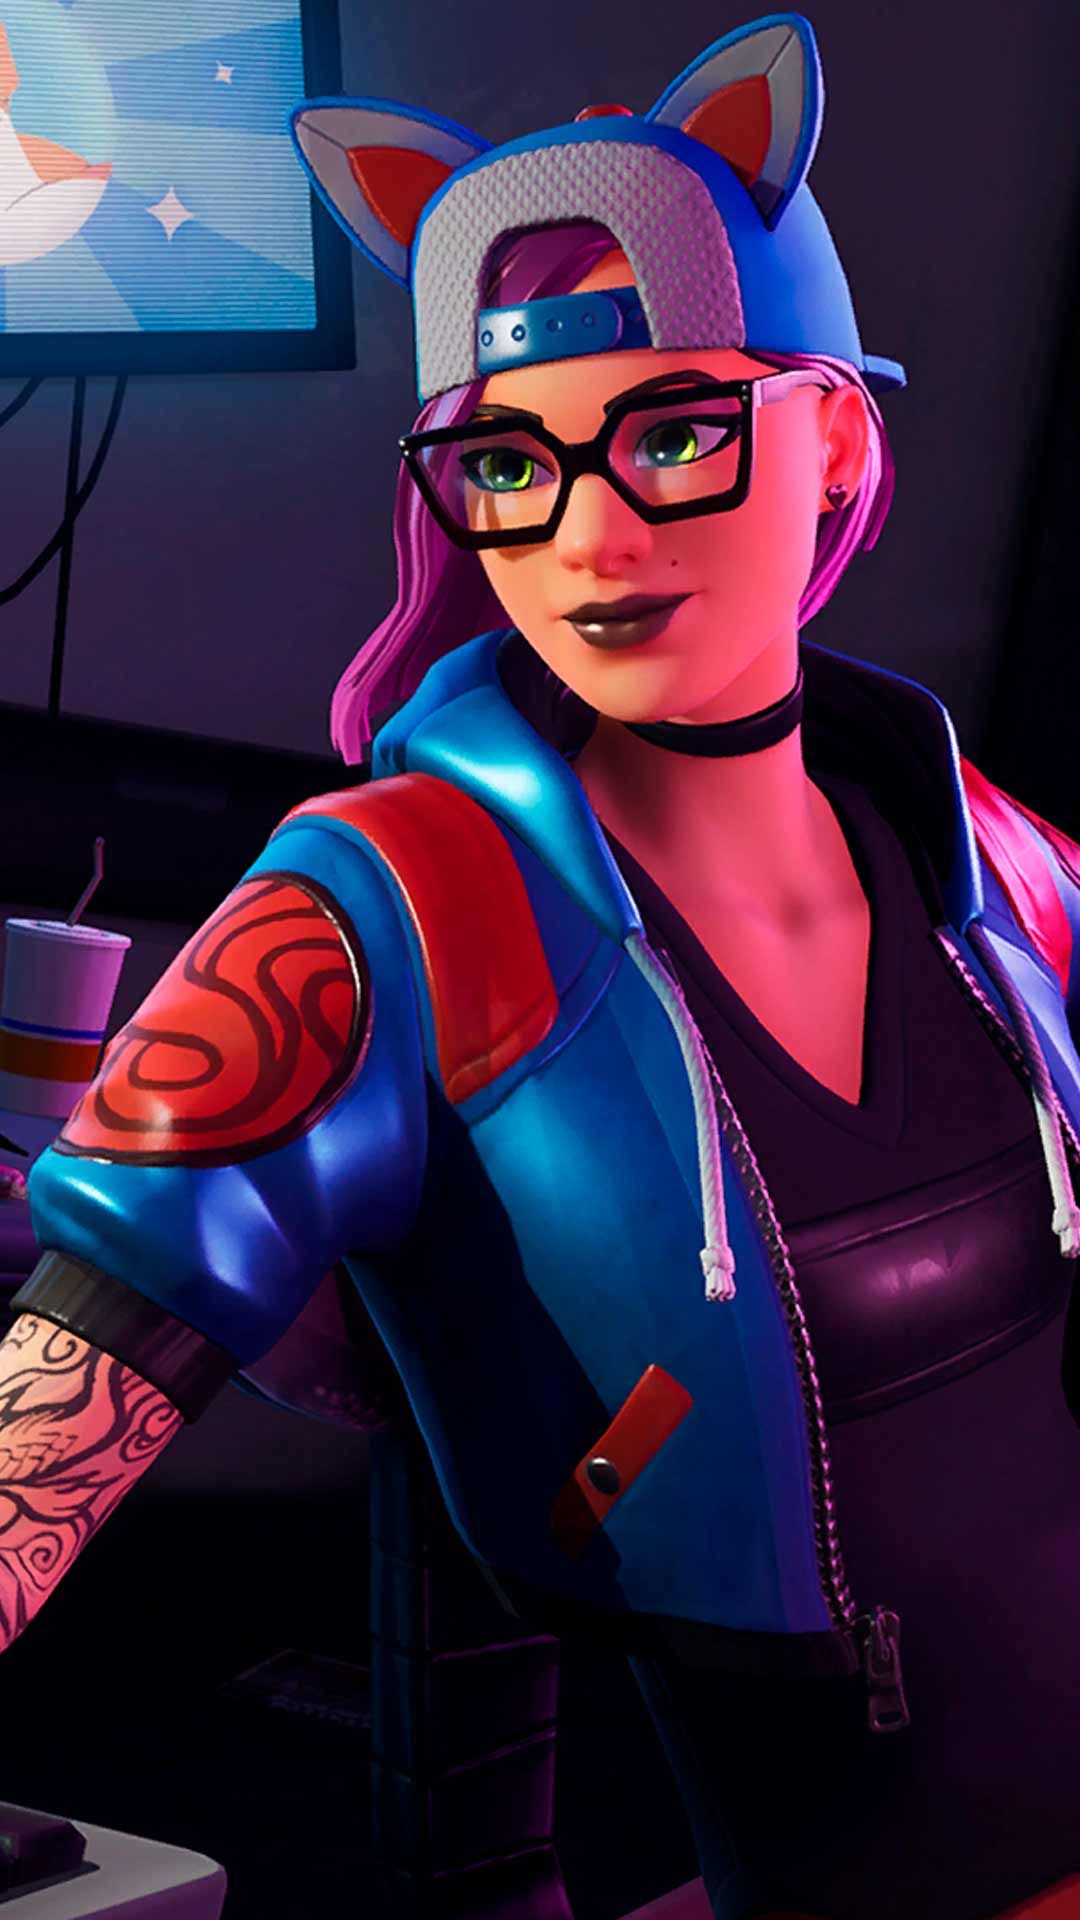 Lynx fortnite skin wallpaper HD phone background art Poster download for iPhone android home screen. Lynx, Phone background, Fortnite